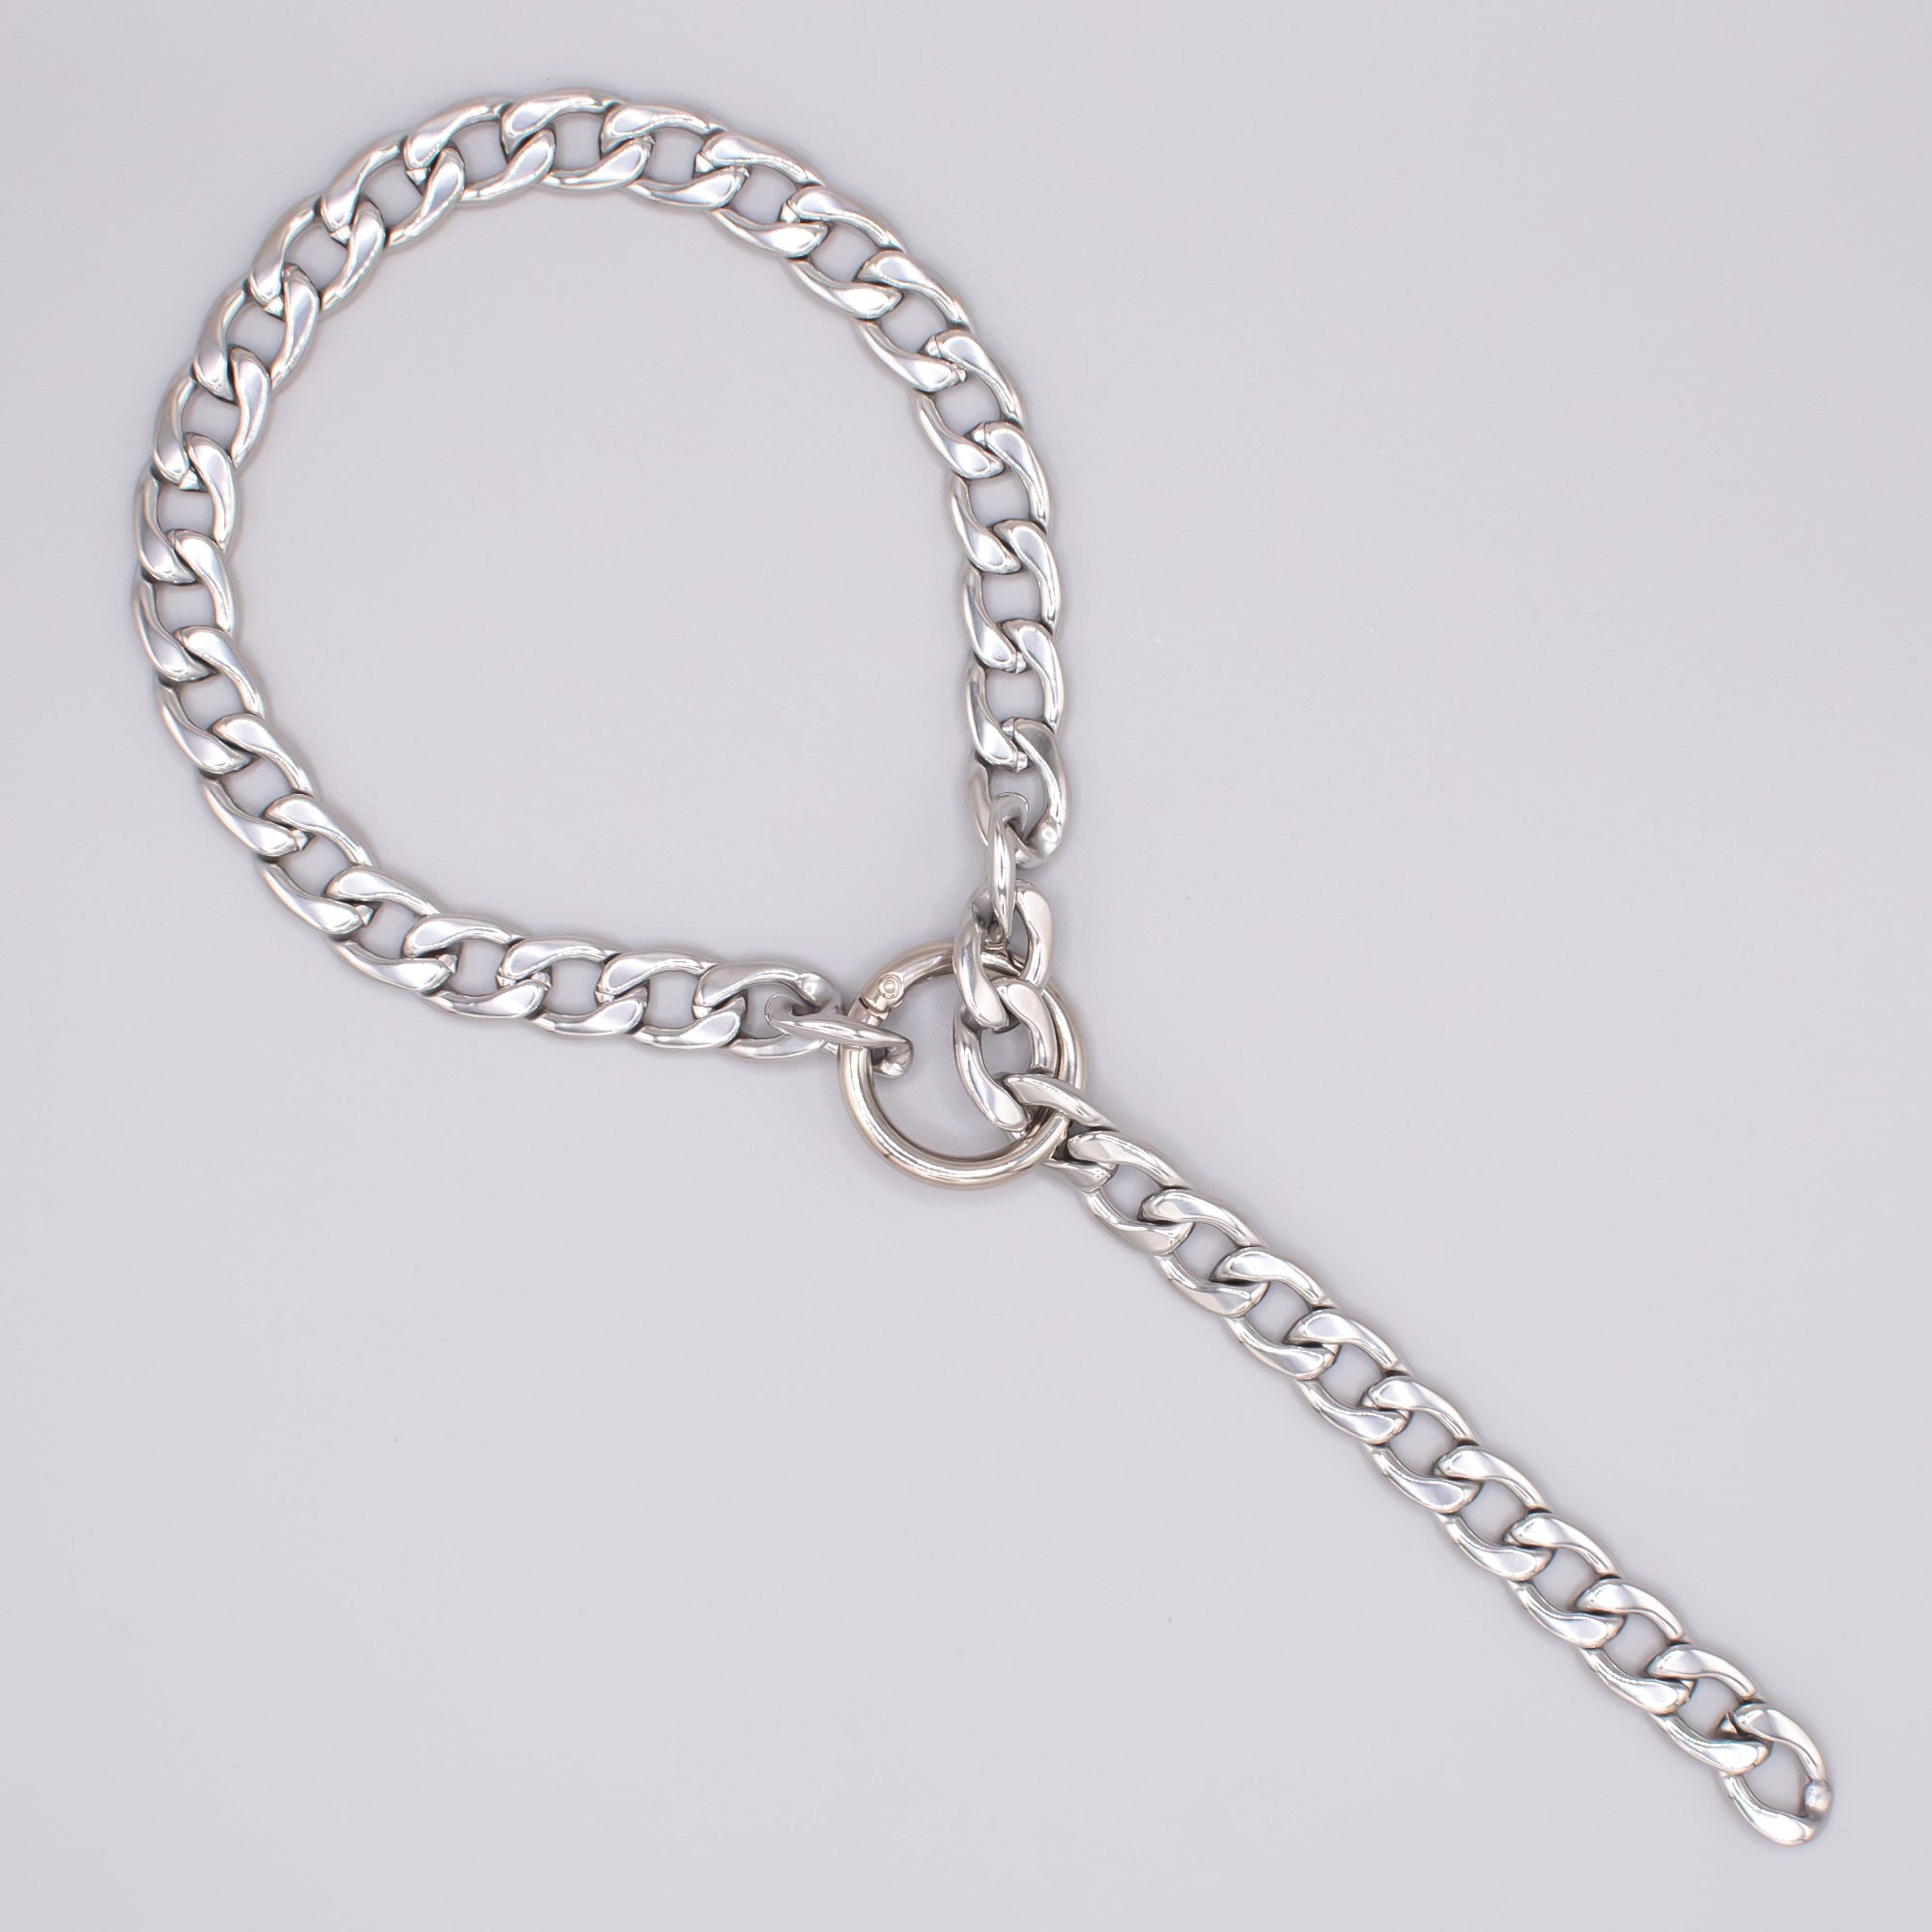 Thicc Cuban Choker Necklace - (Silver) 12mm